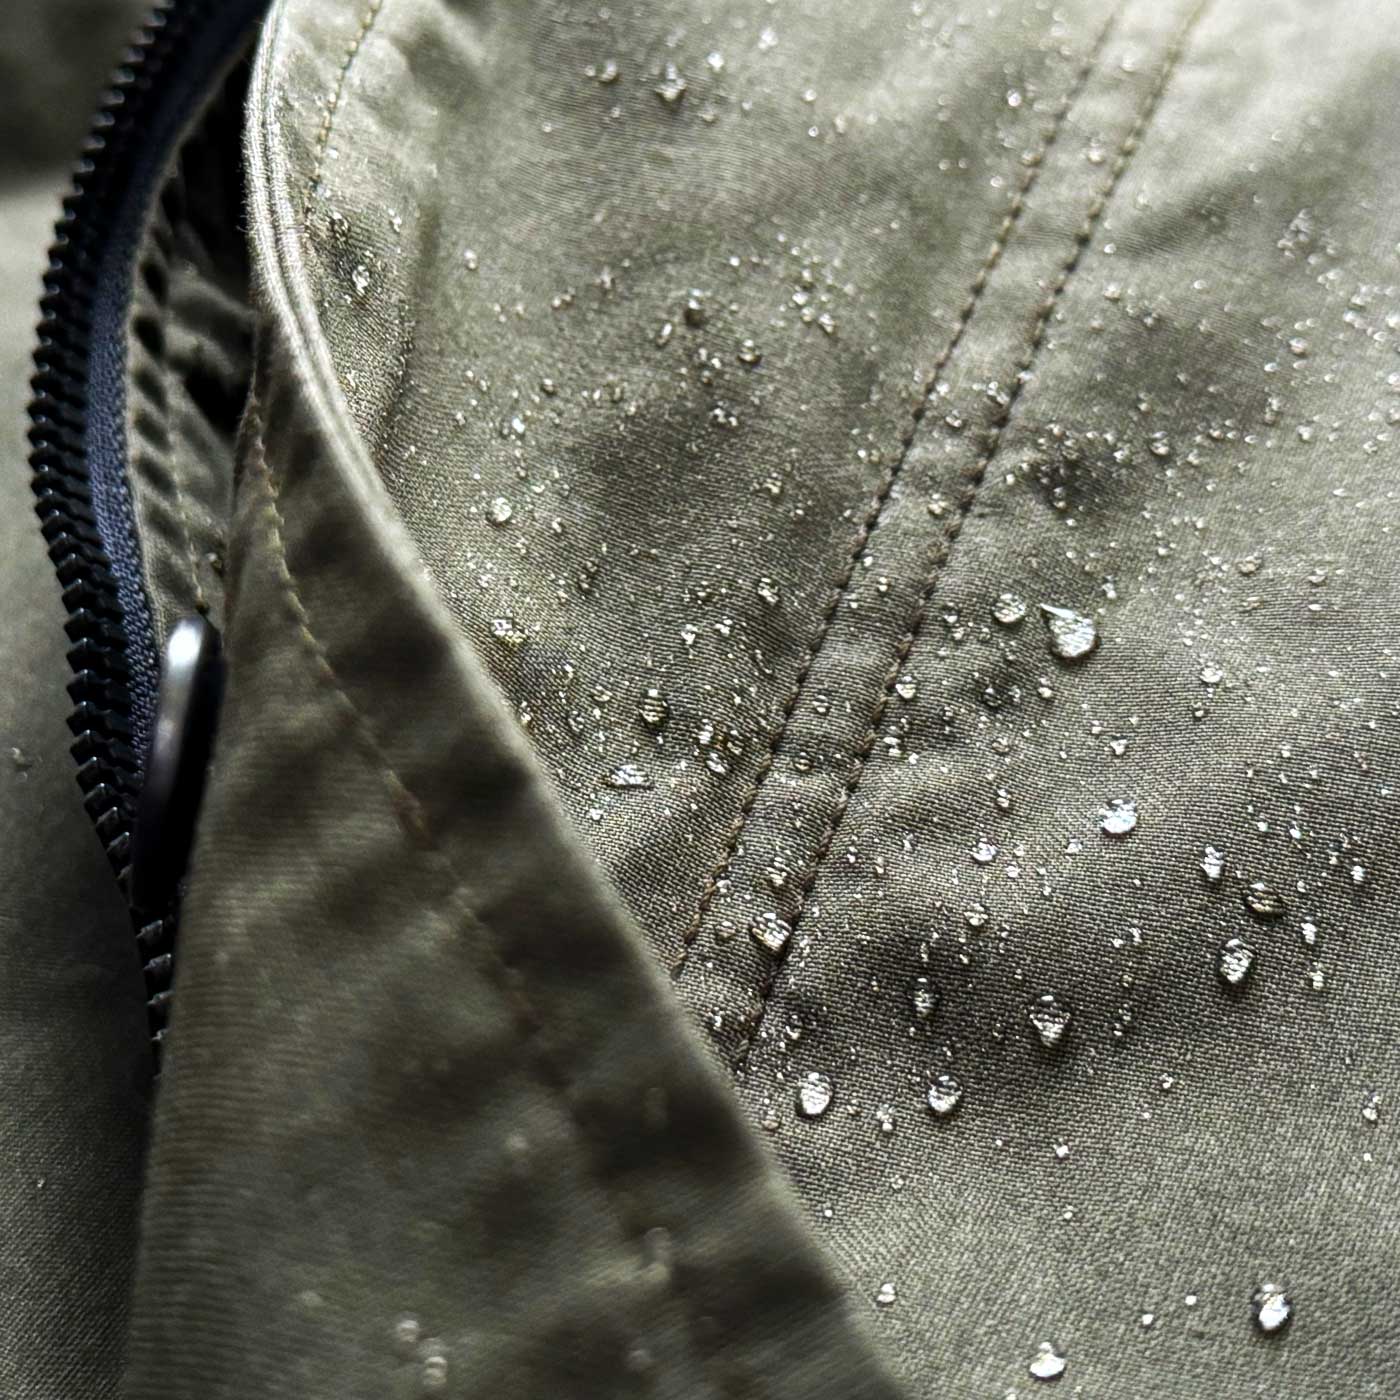 FOR LEGENDS BY CADUFF | WAXED COTTON FABRIC | WATER REPELLENT 